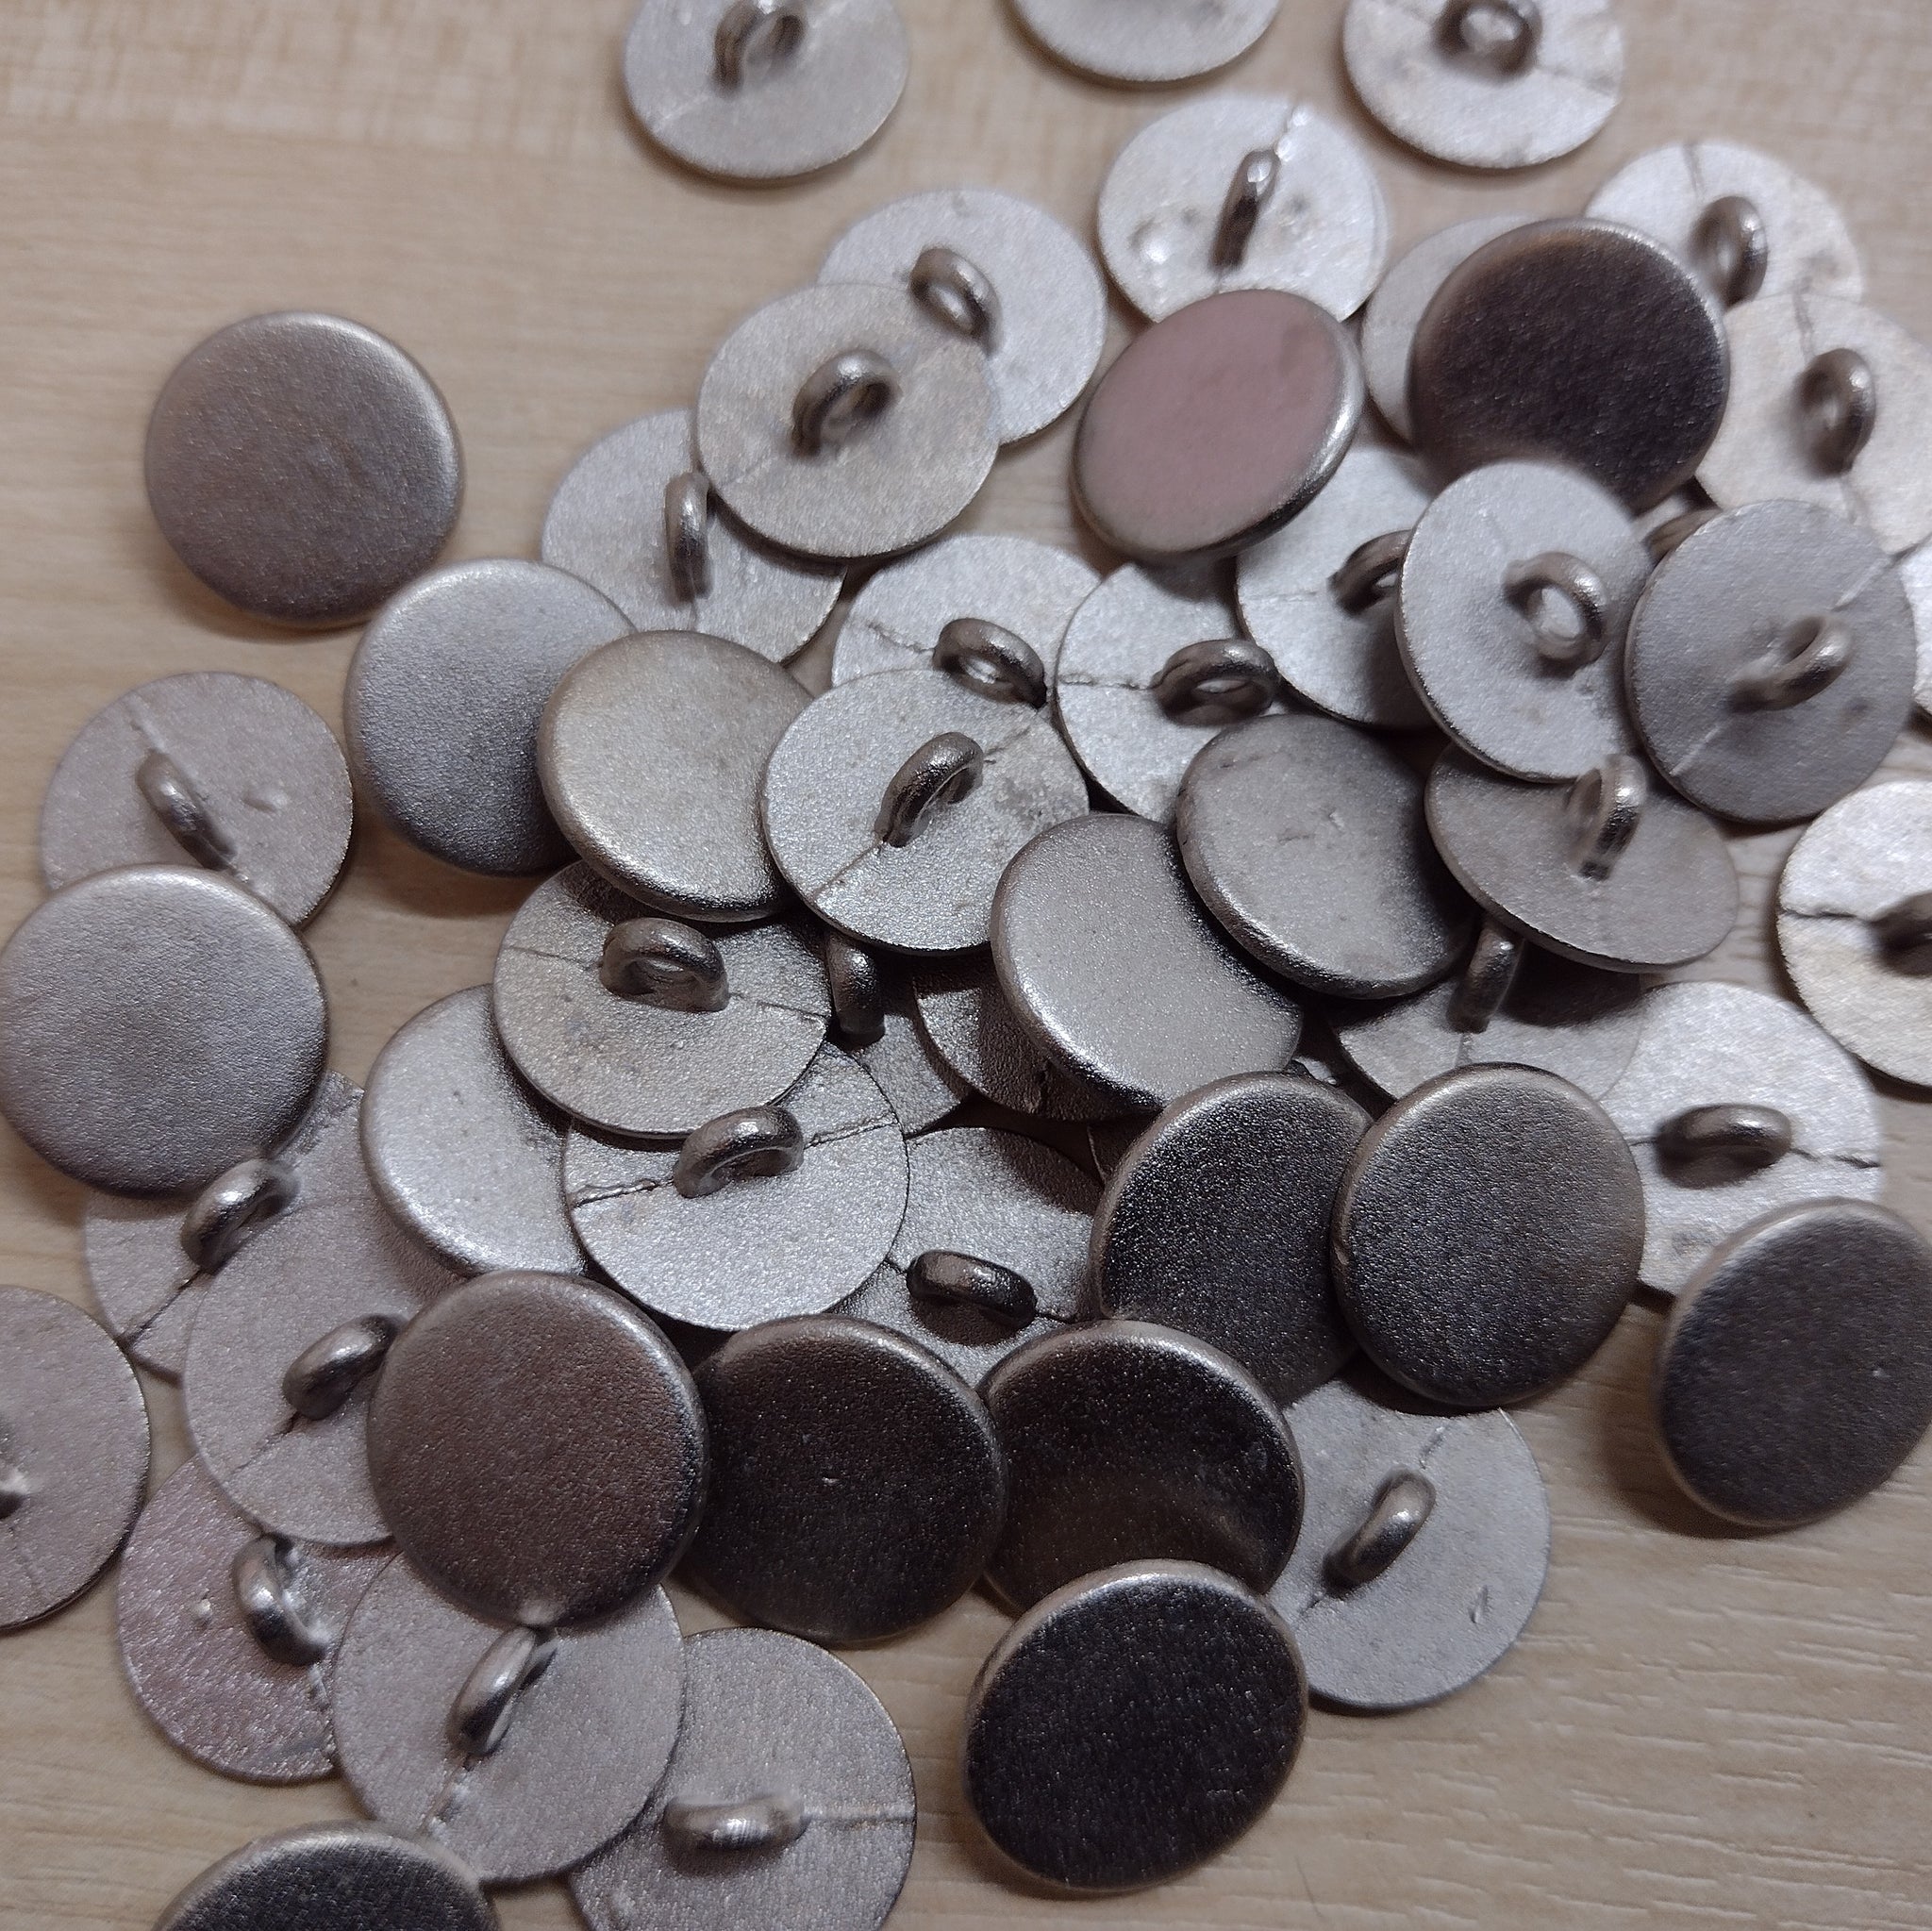 Silver Finish Metal Buttons Shank 15mm in Diameter 1/2 Inch Silver Tone Shank  Button 05p 